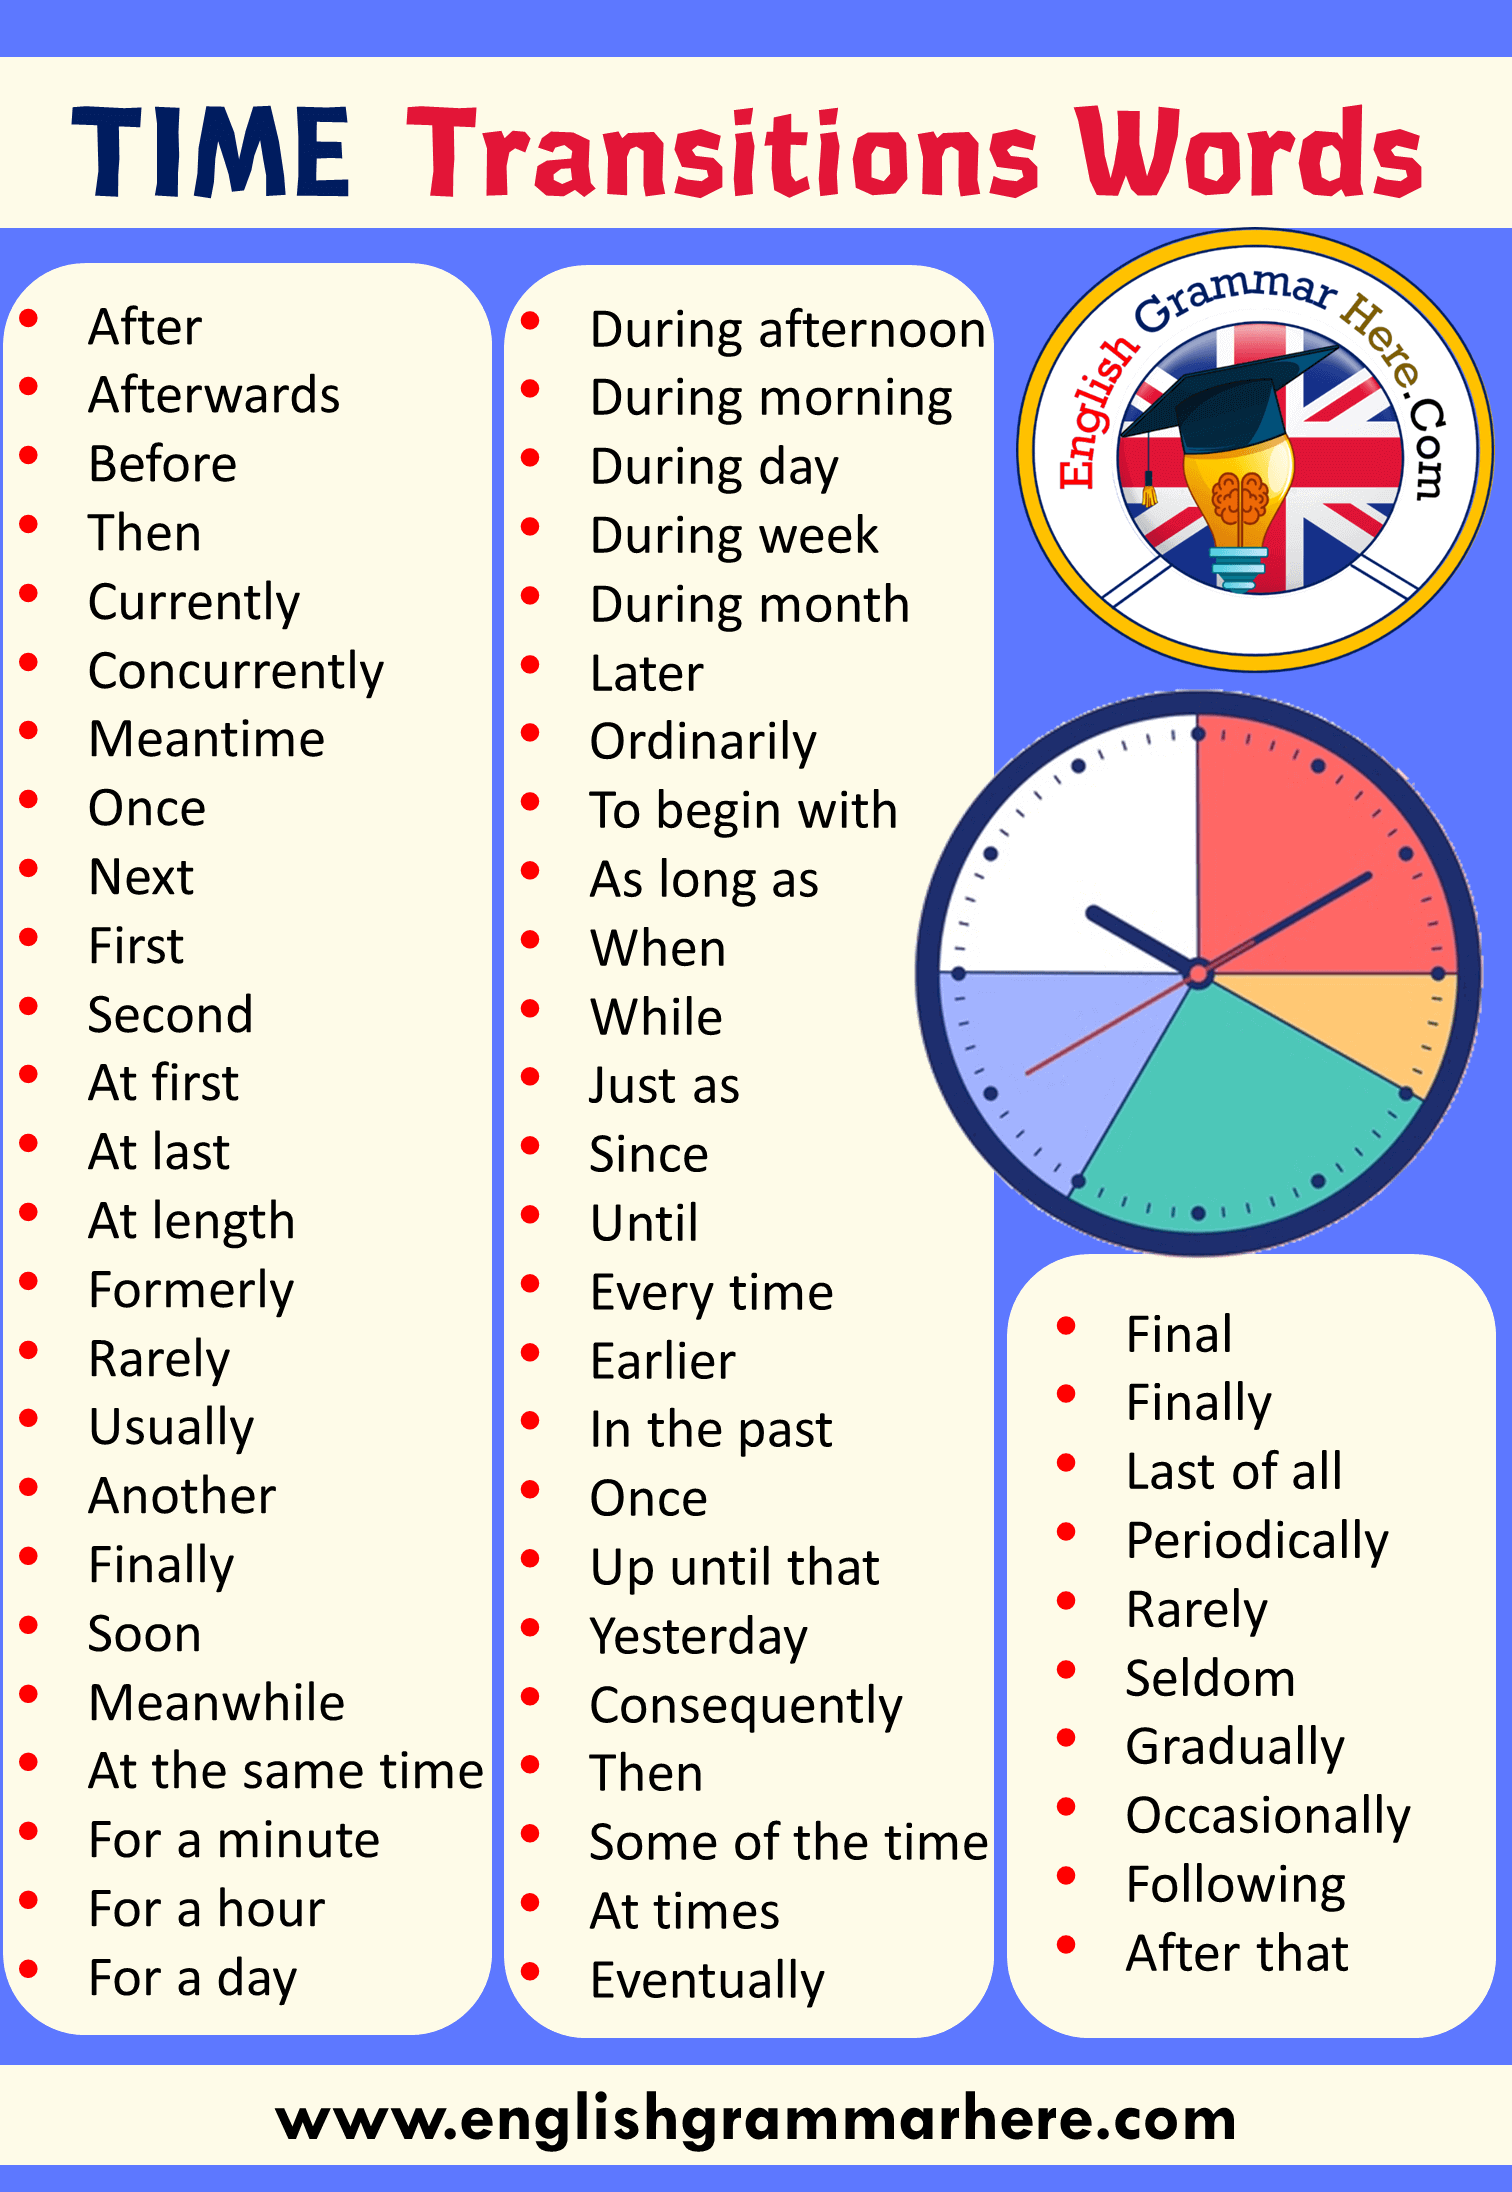 TIME Transitions Words List in English   English Grammar Here